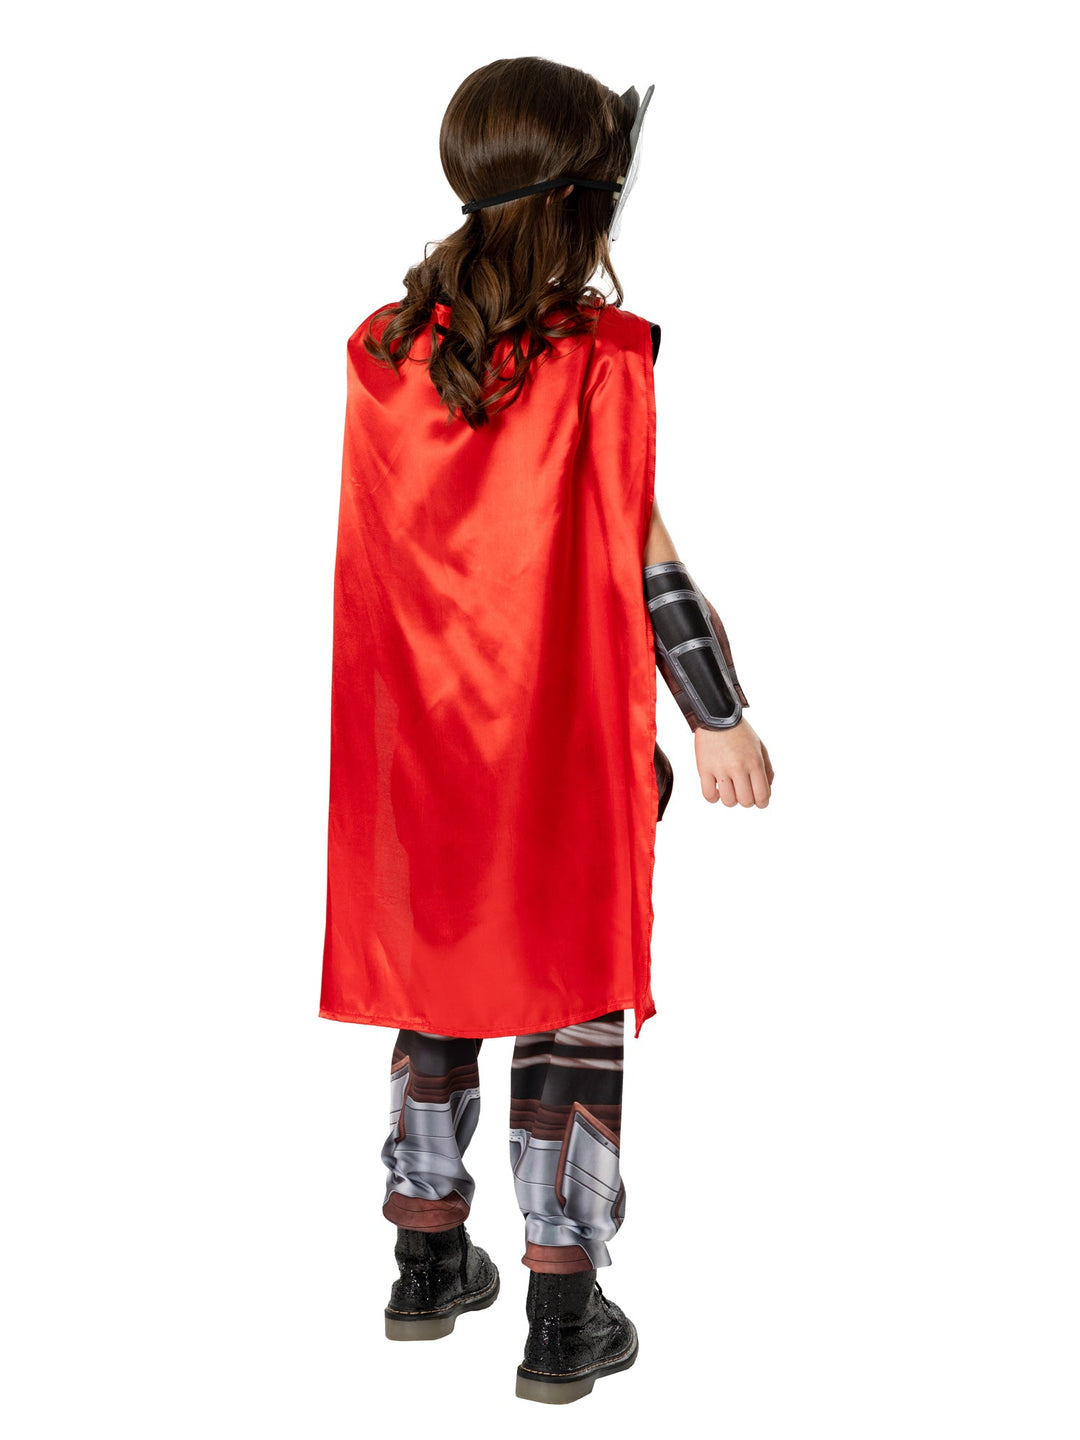 Mighty Thor Costume Love and Thunder Girls Jane Foster_5